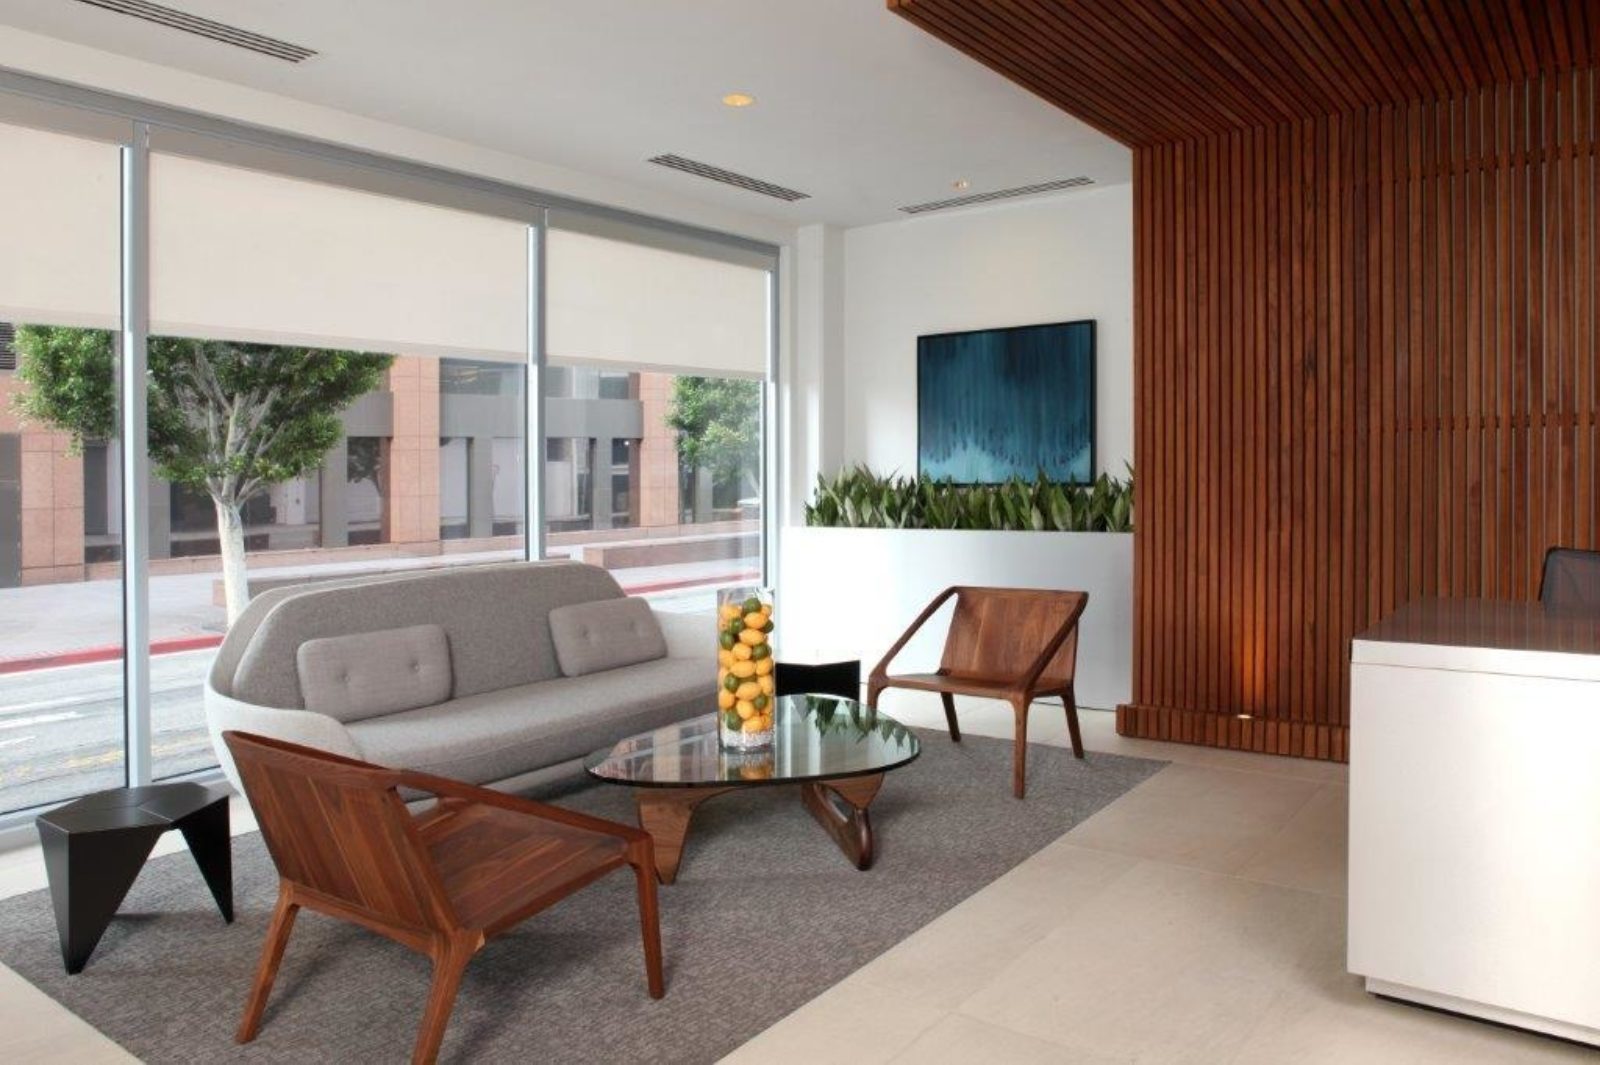 A lounge chair and coffee table are placed beside a white reception desk, creating a comfortable waiting area.